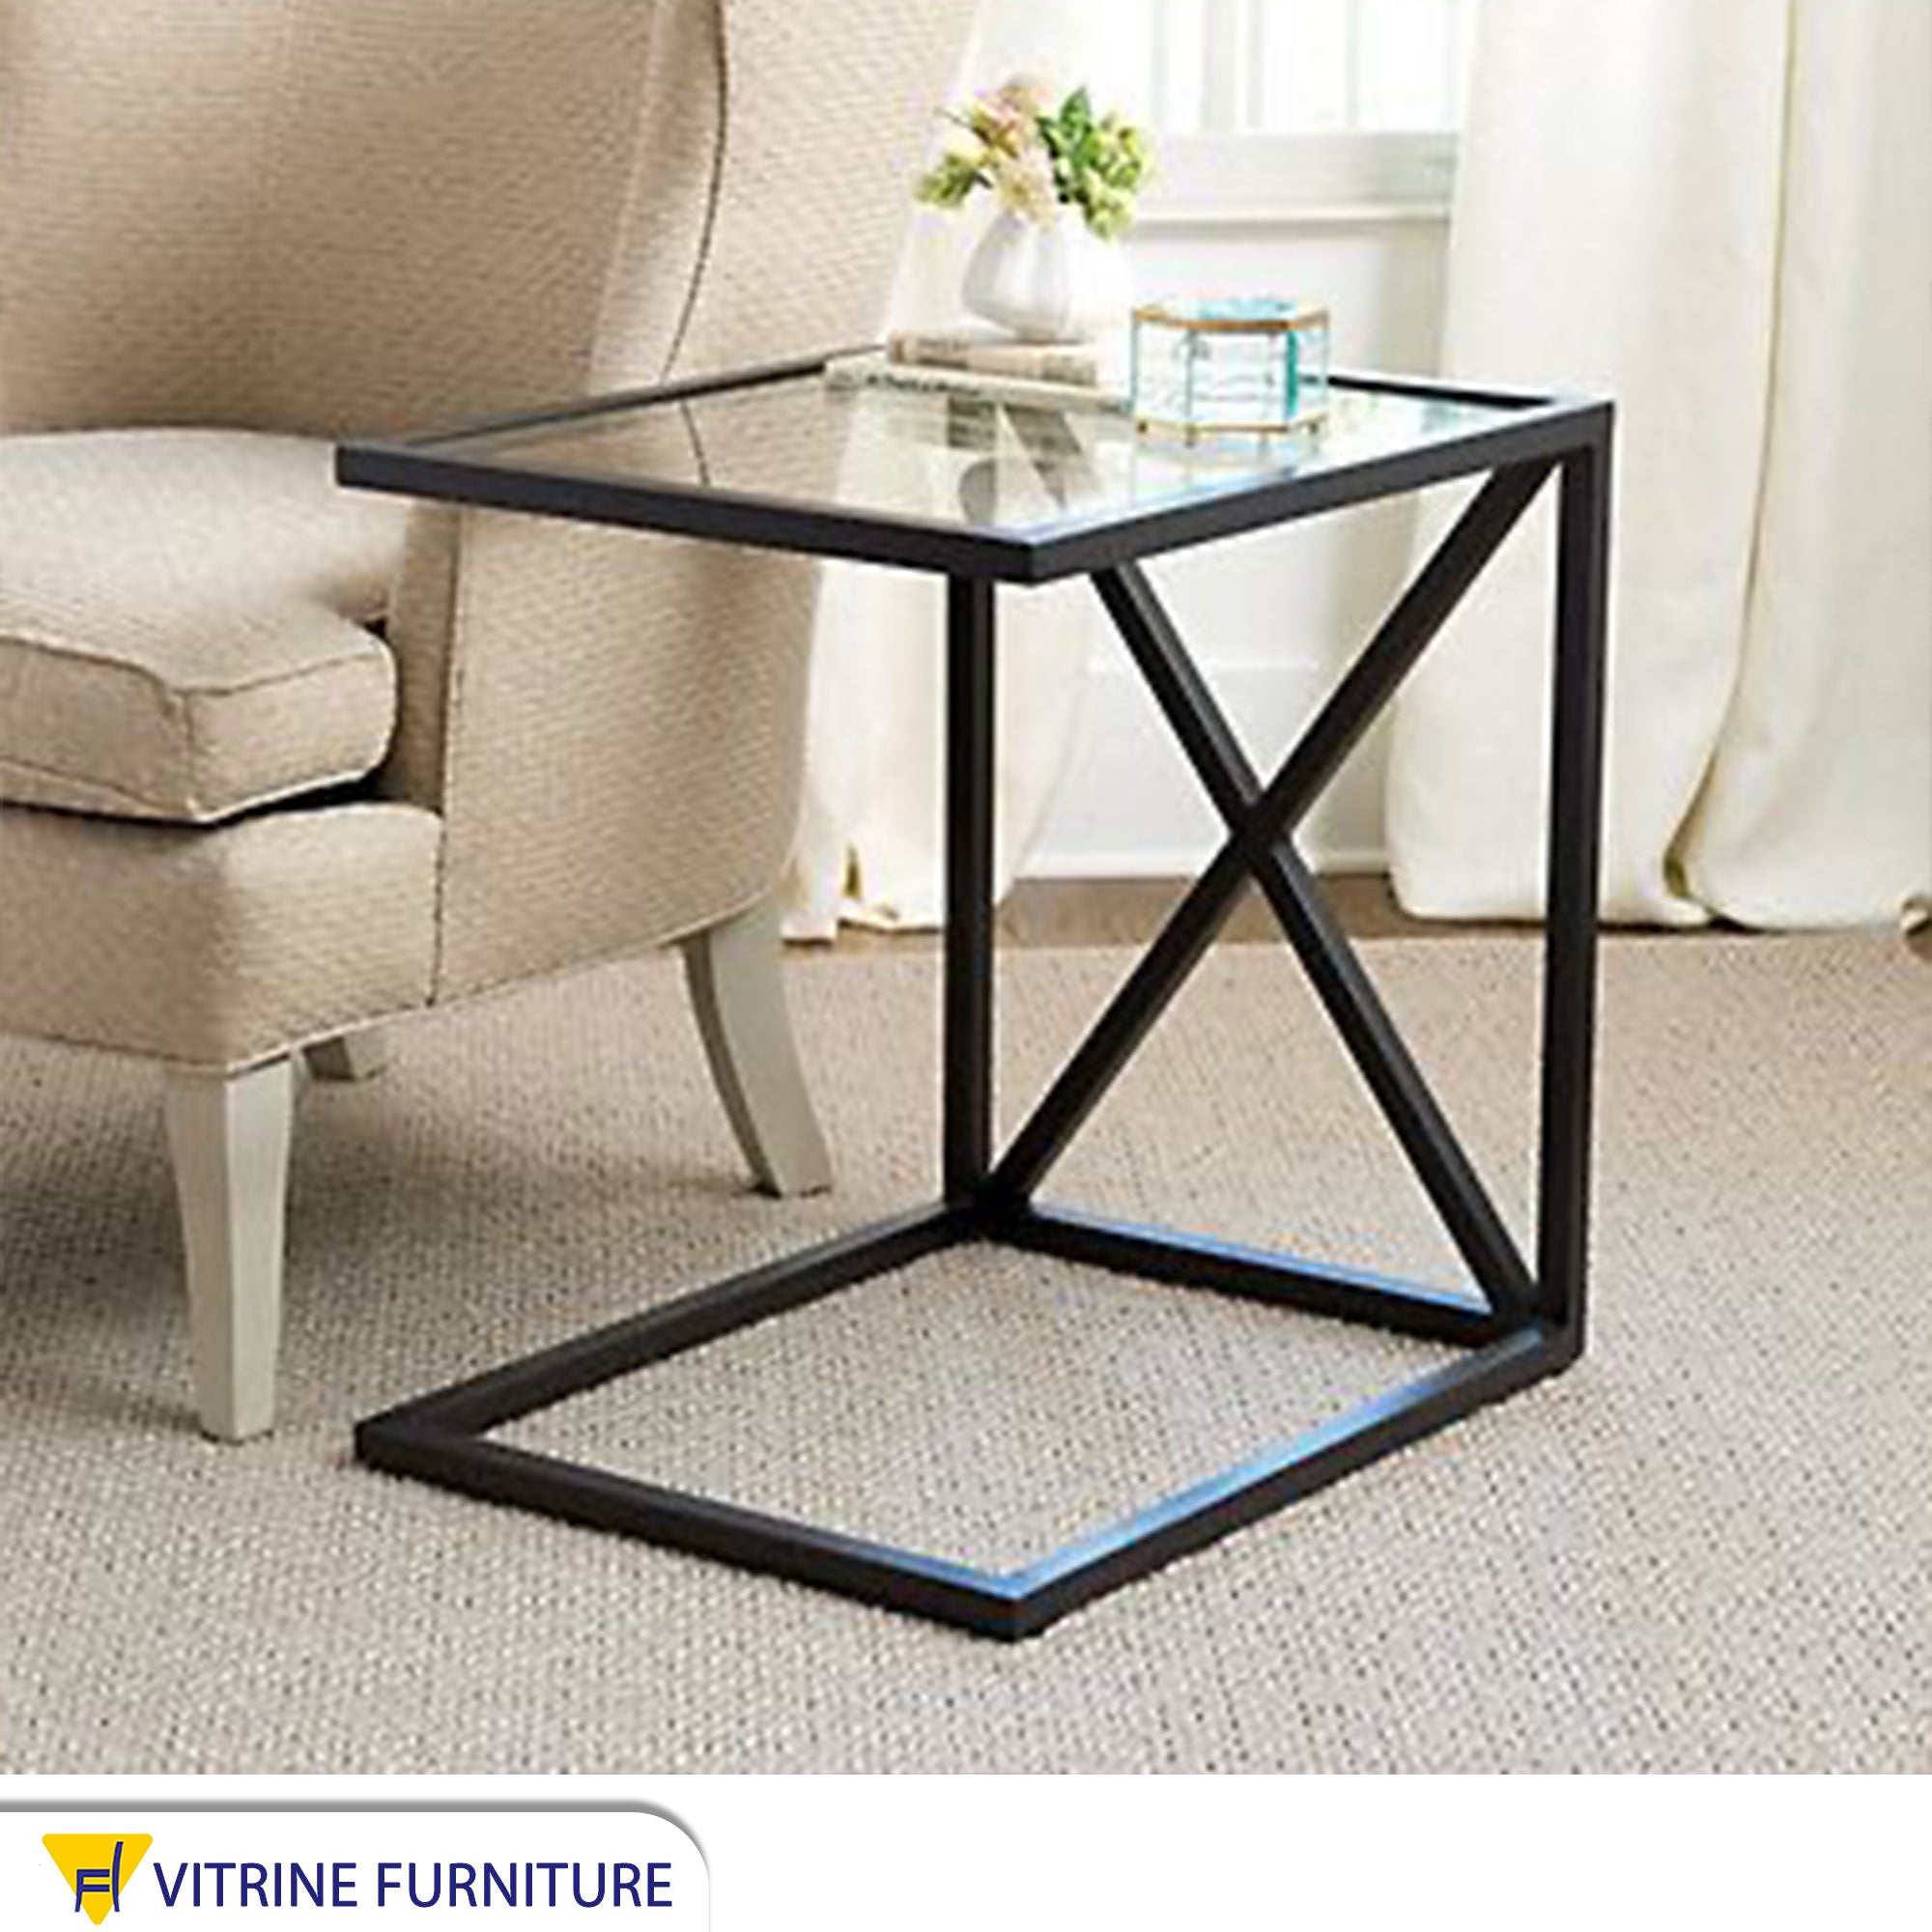 Side table with glass surface